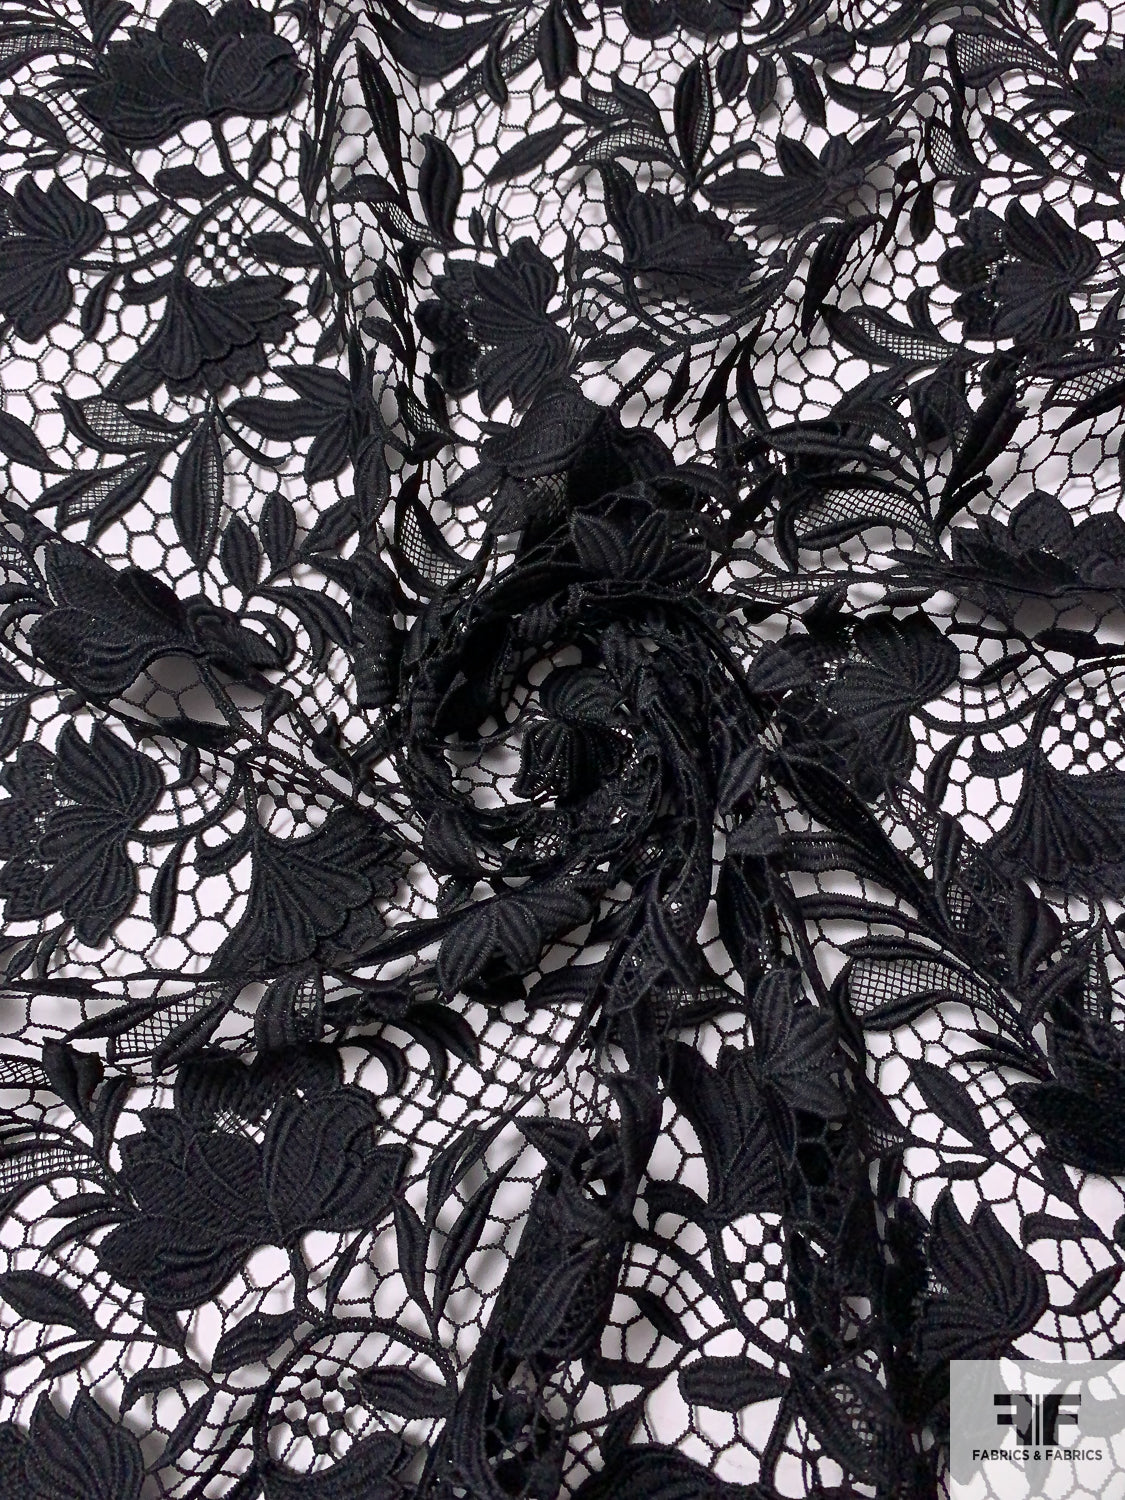 Black Polyester Lace Fabric by The Yard (100% Polyester)